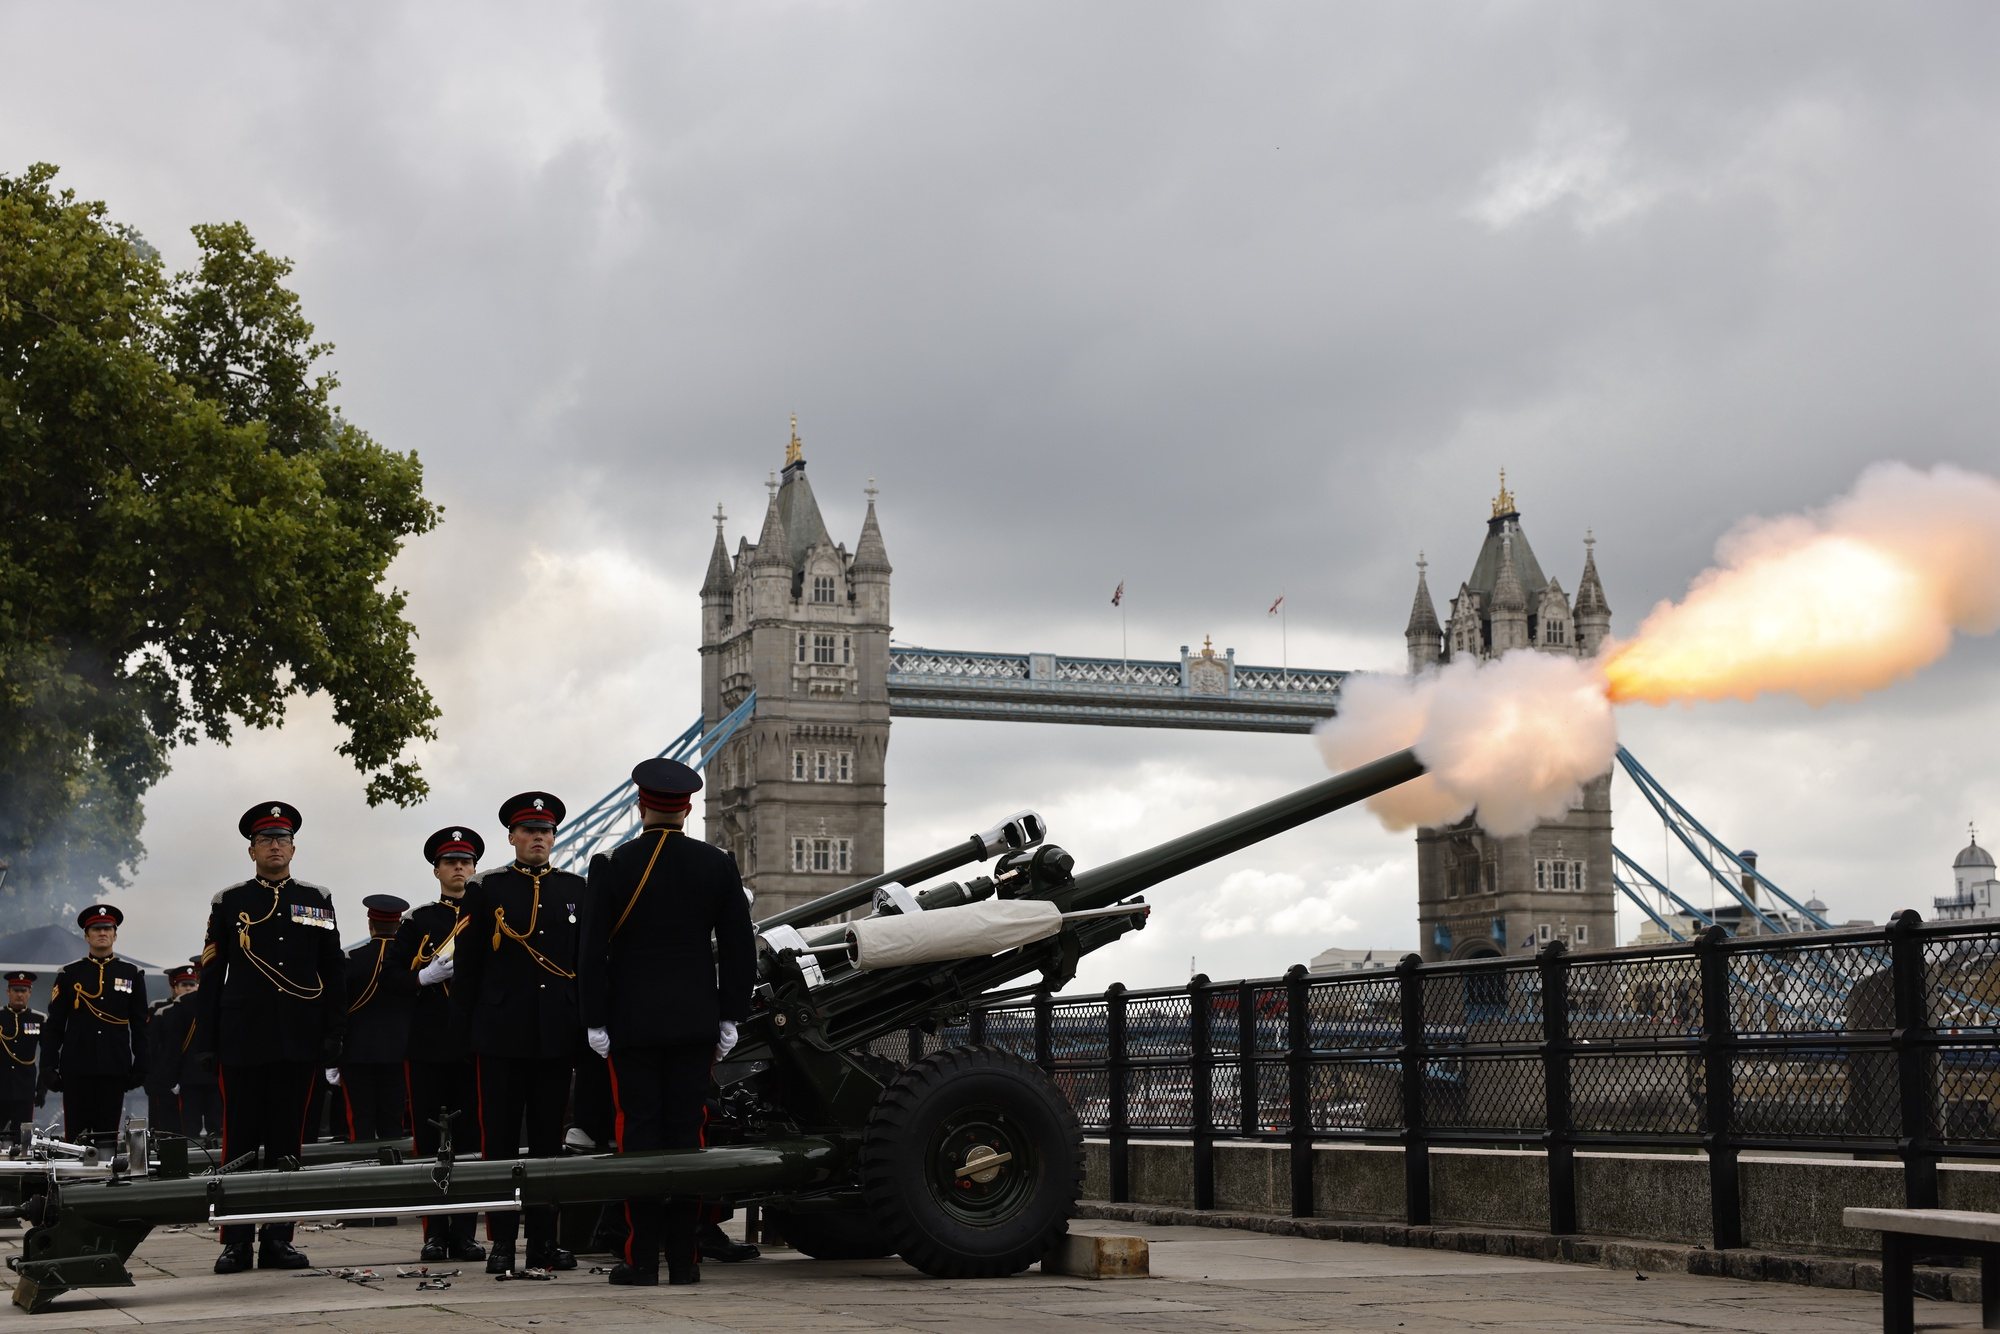 epa10175151 The gun salute to mark the formal declaration of King Charles III as Britain&#039;s new monarch, at the Tower of London in London, Britain, 10 September 2022. Britain&#039;s Queen Elizabeth II died on 08 September 2022. King Charles III was formally announced as the new sovereign during a meeting of the Accession Council.  EPA/TOLGA AKMEN